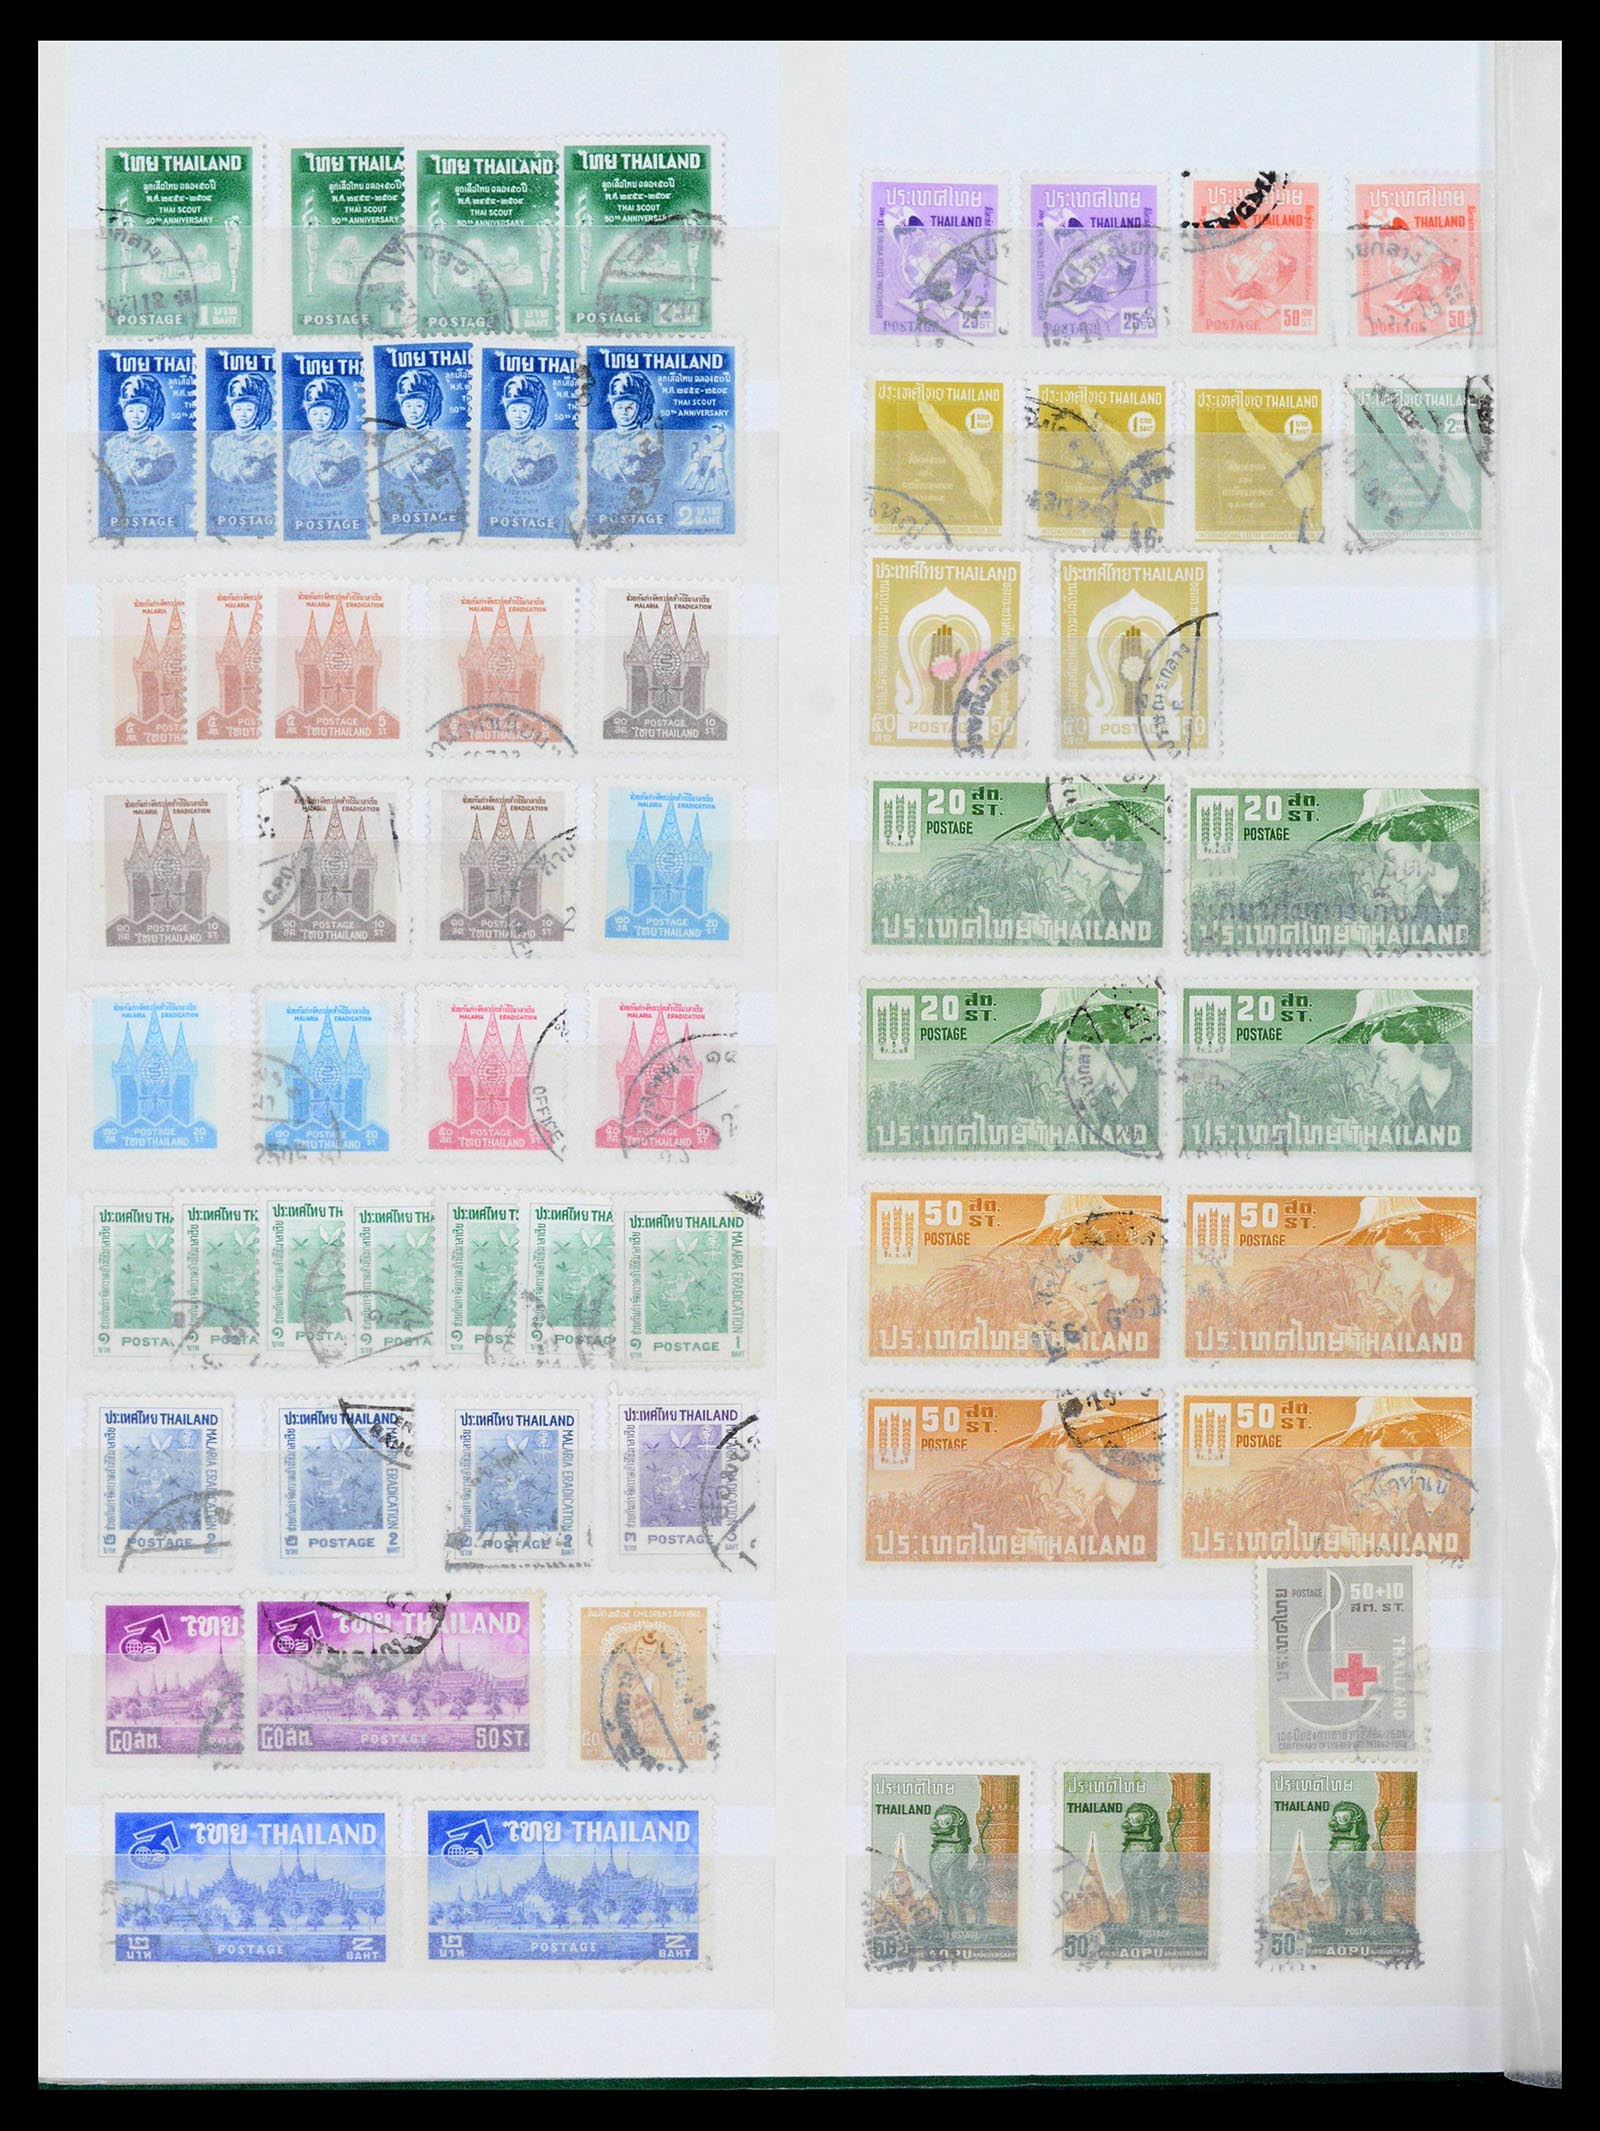 39384 0024 - Stamp collection 39384 Thailand 1883-2014.